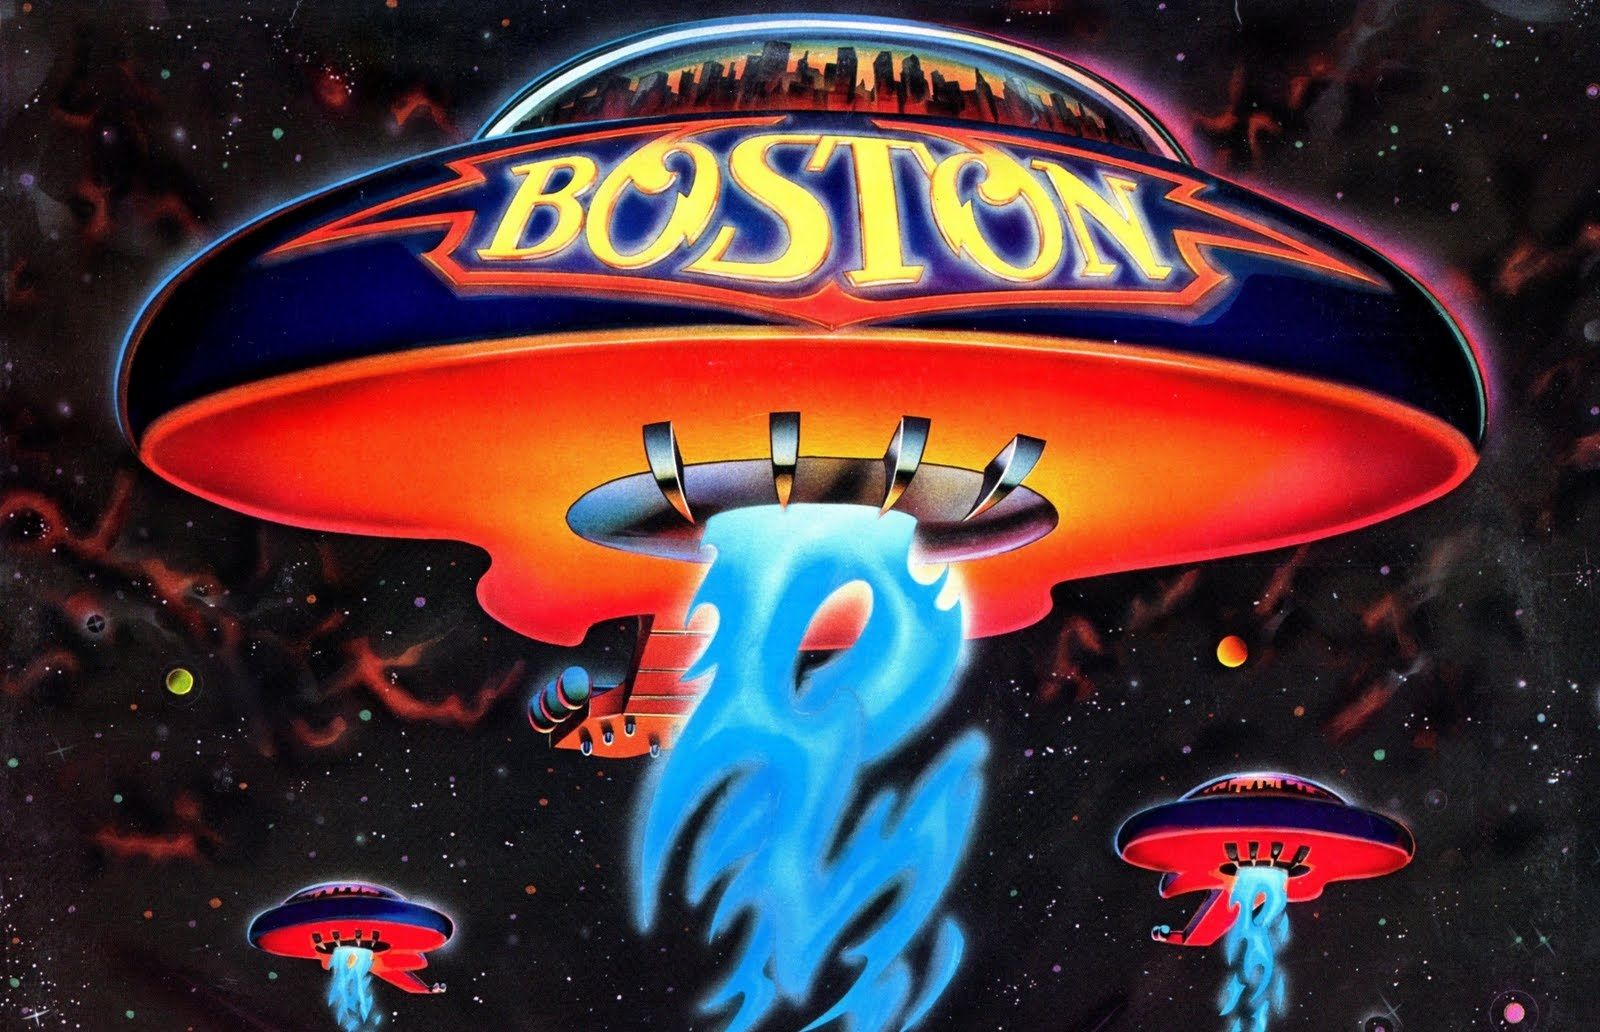 The YES! Weekly Blog: BOSTON ROCKS THEIR 40TH ANNIVERSARY WITH